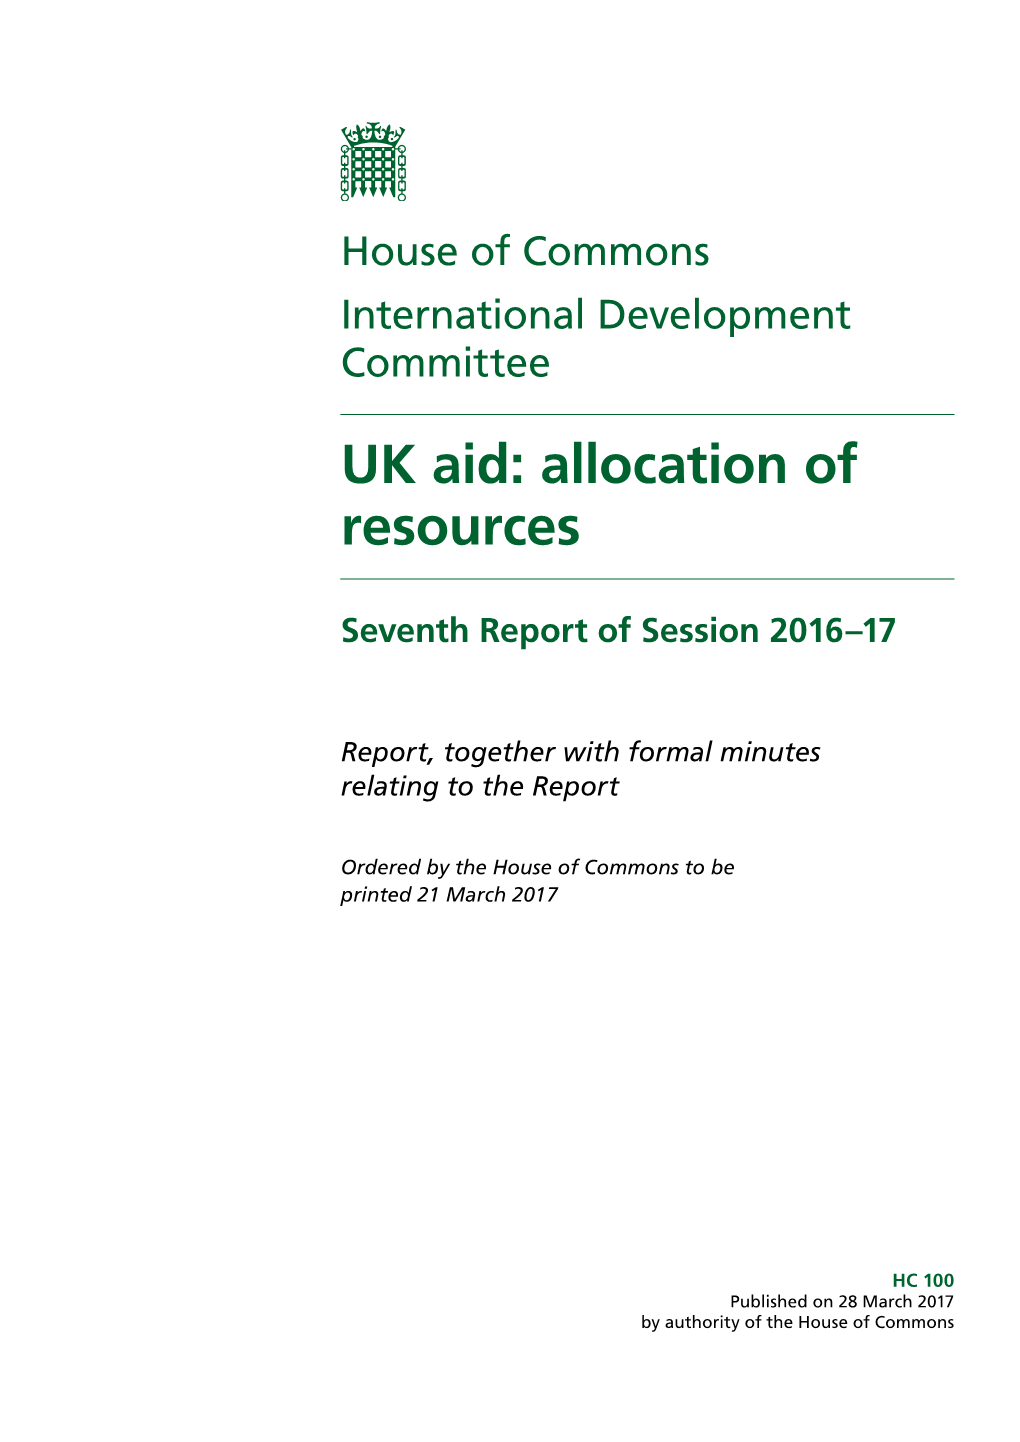 UK Aid: Allocation of Resources